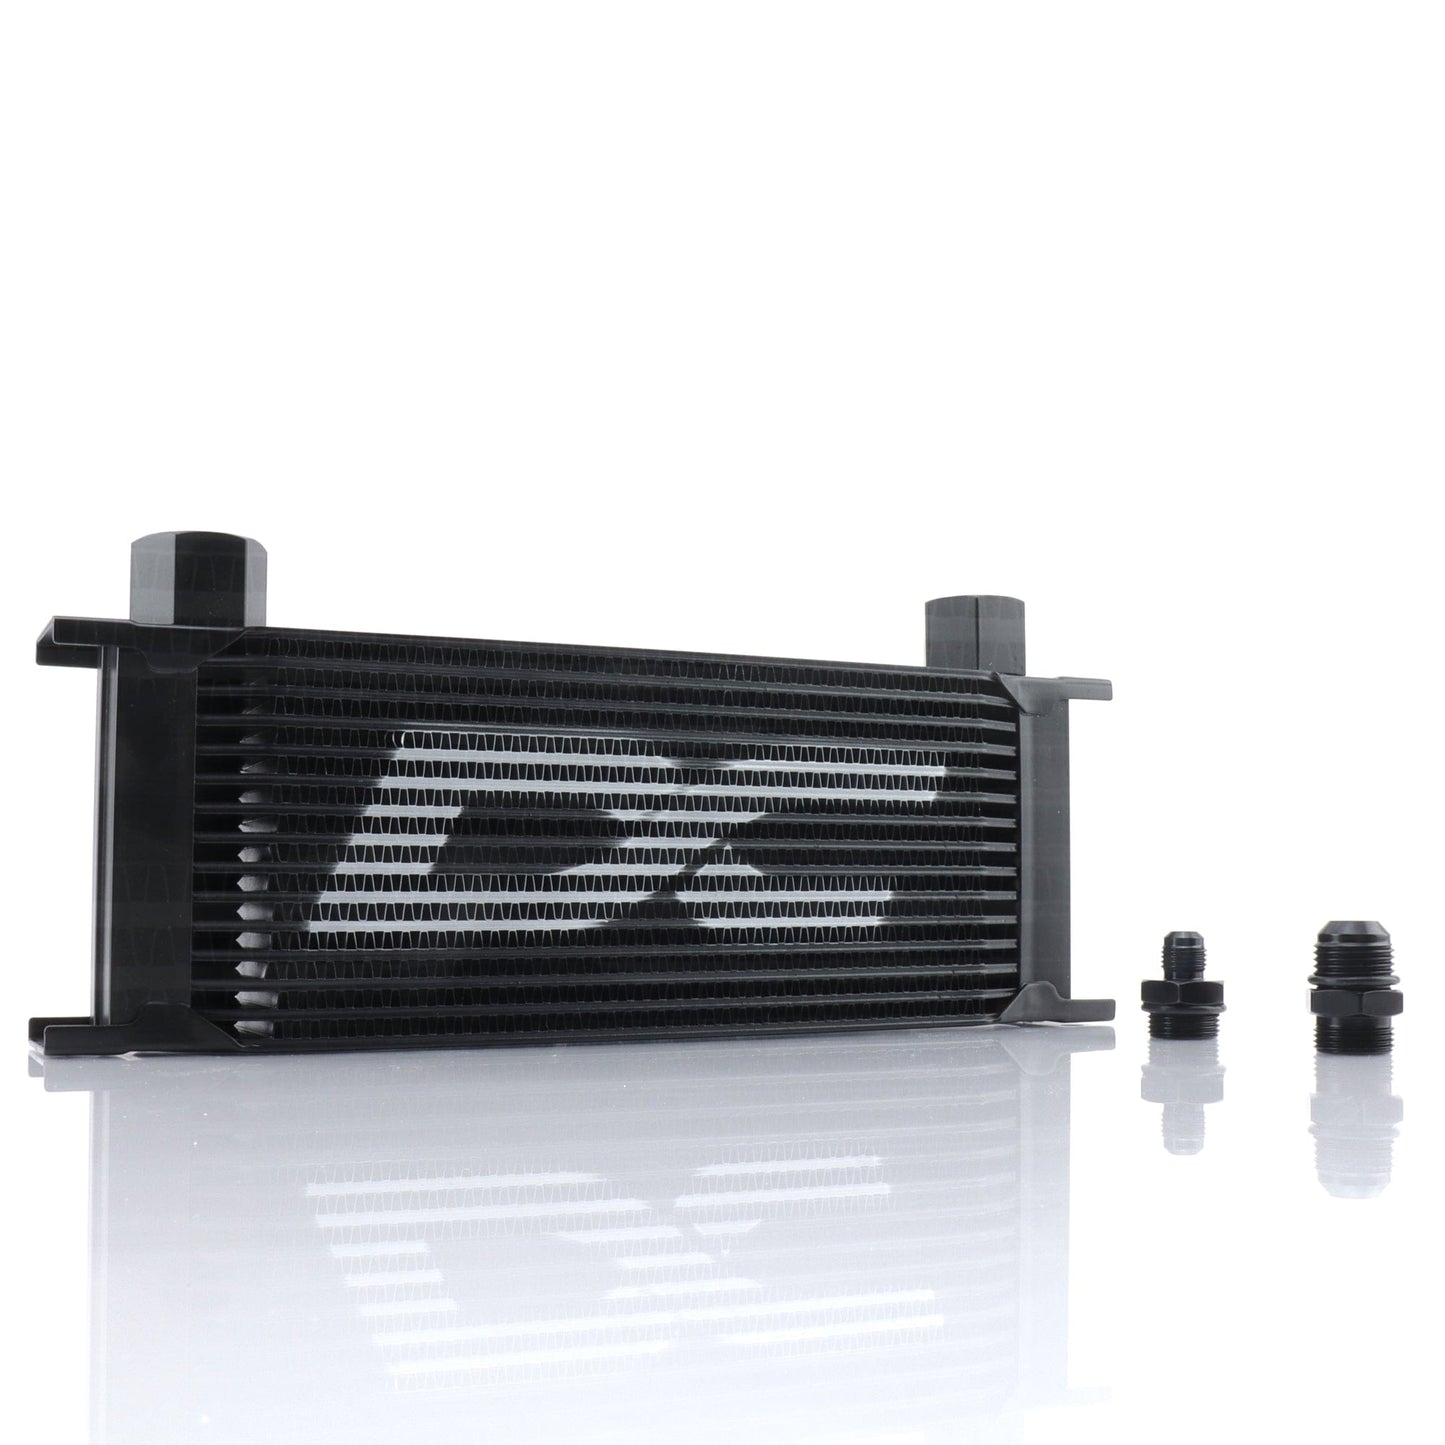 DC Sports Oil Cooler -6 Fittings DC SPORTS 15 ROW UNIVERSAL OIL COOLER; BLACK